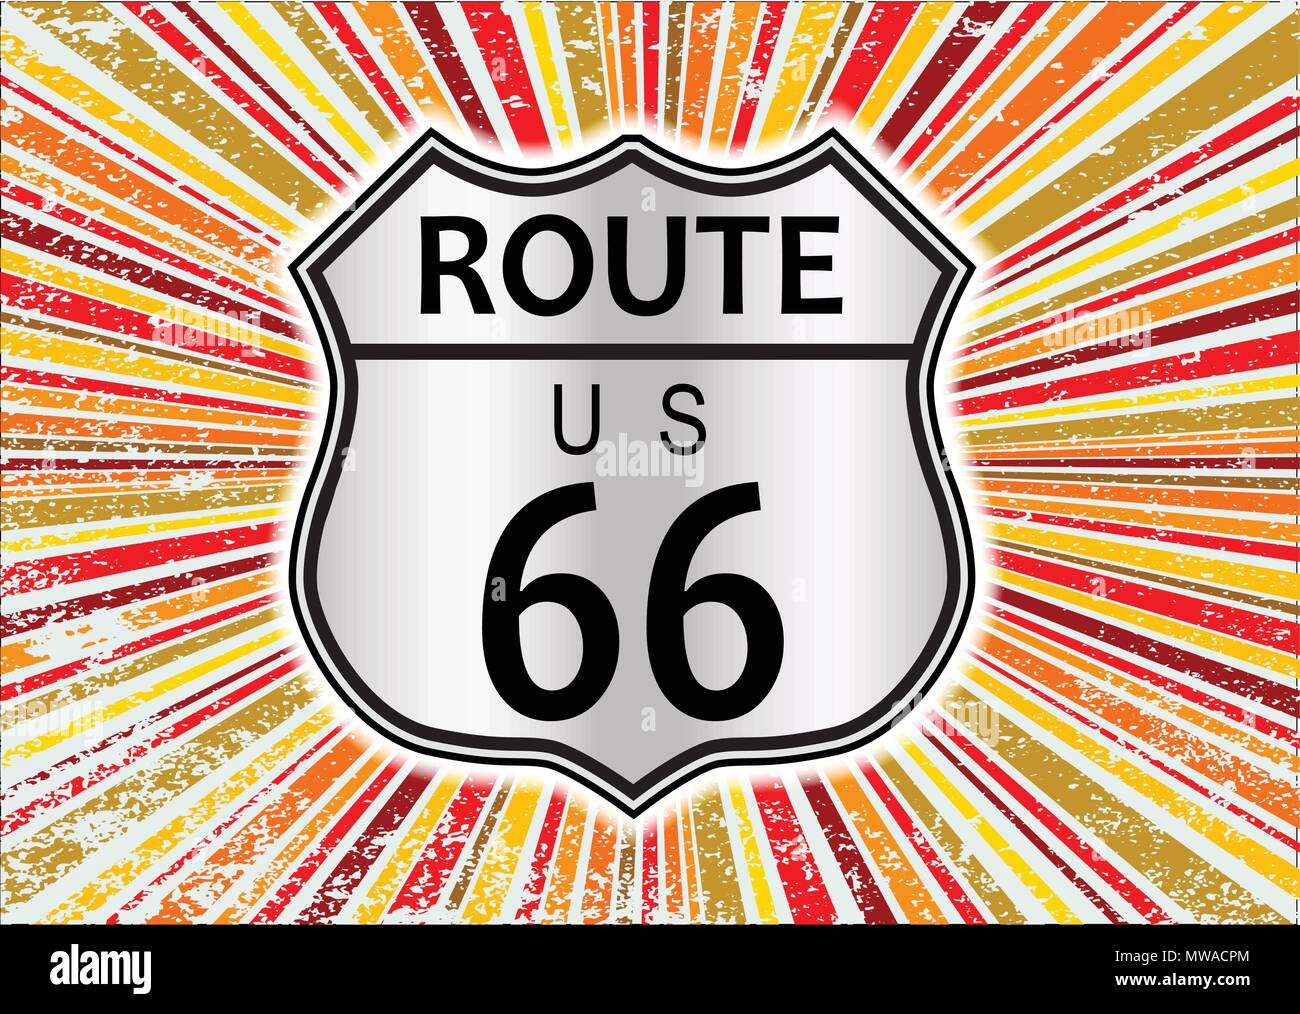 Route 66 highway sign set on an abstract and retro grunge backround design element in reds and oranges Stock Vector